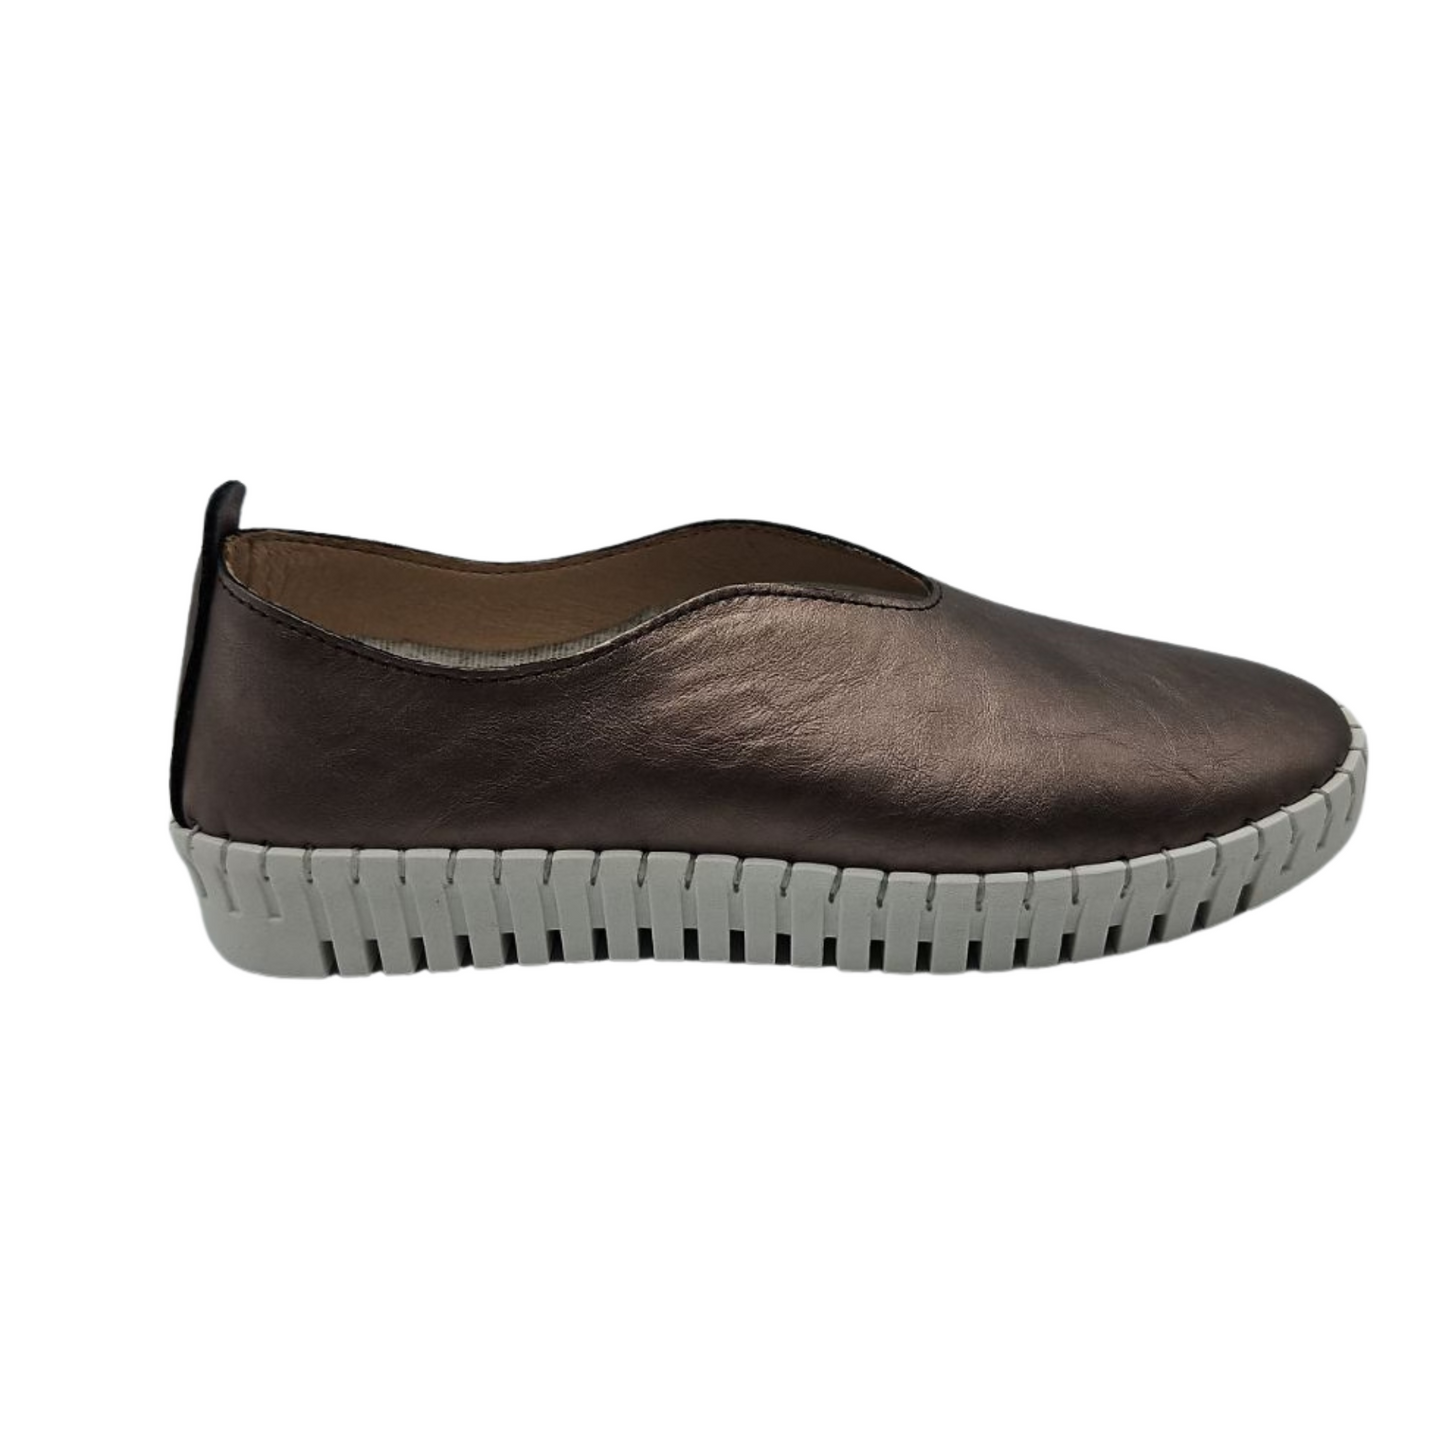 Right facing view of pewter leather slip on shoe with white rubber outsole